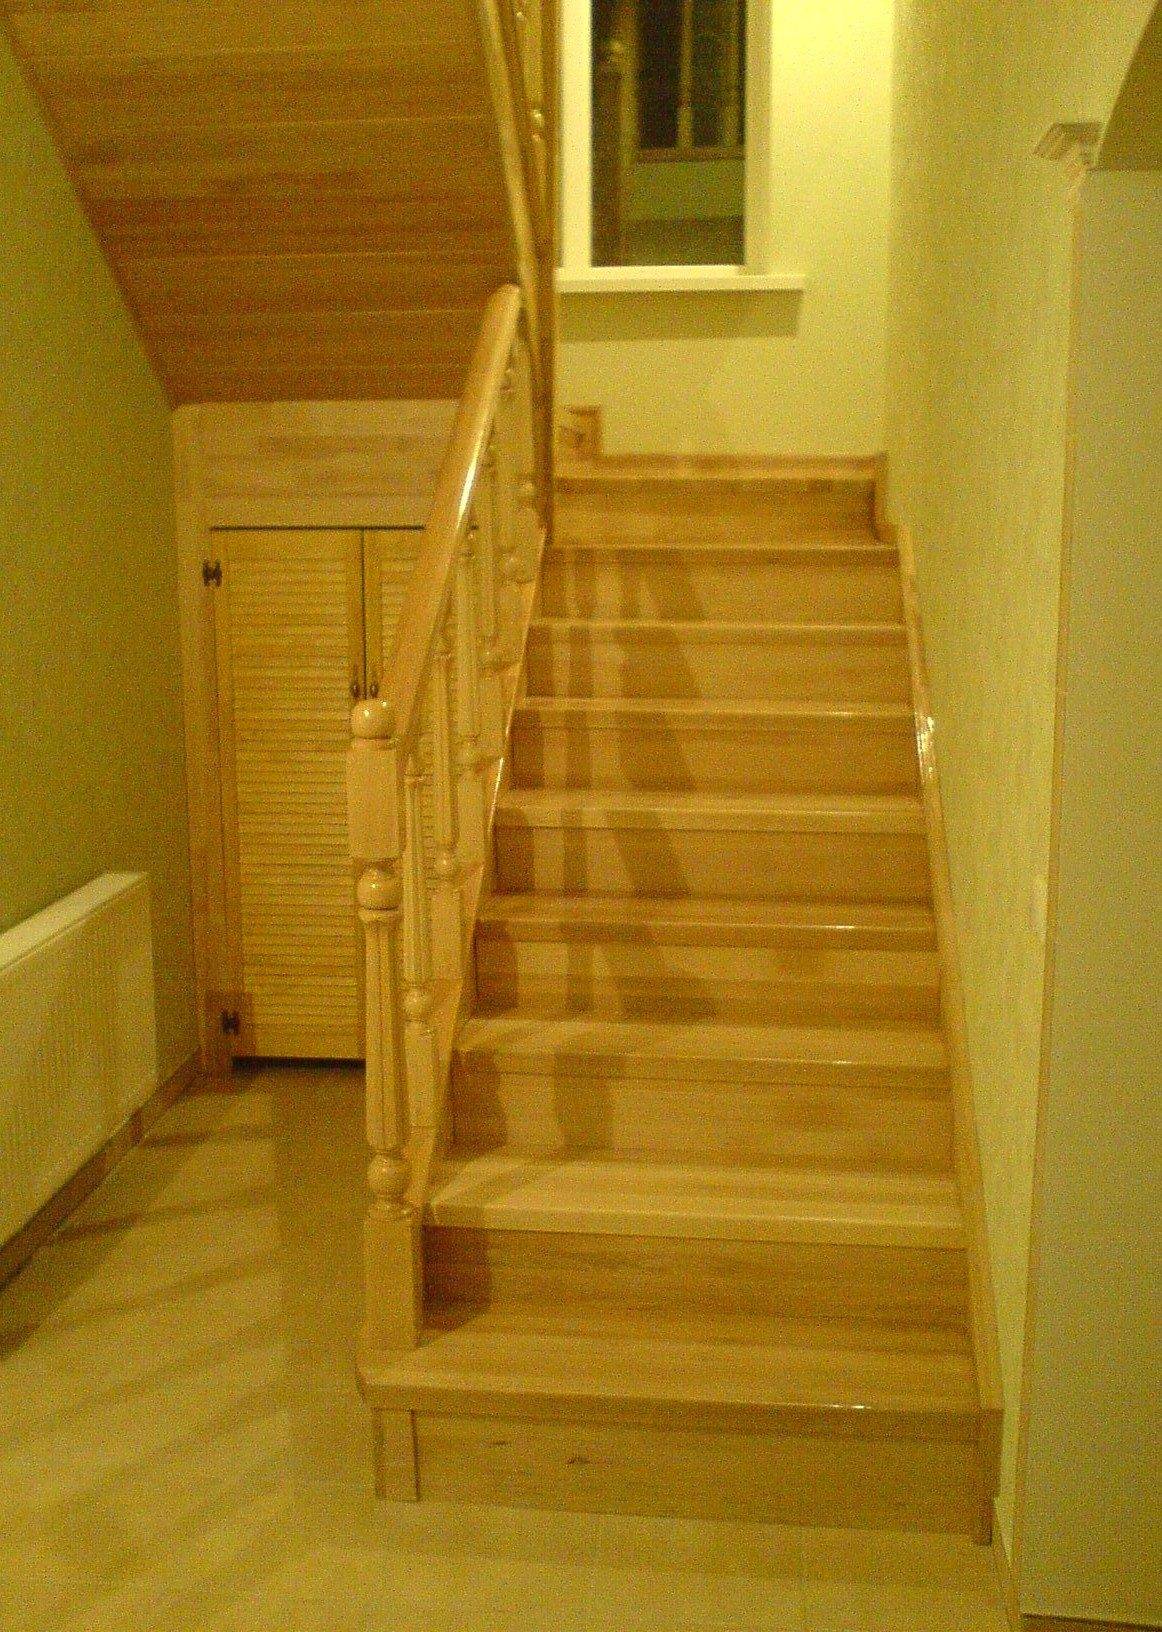 Marching stairs made of wood